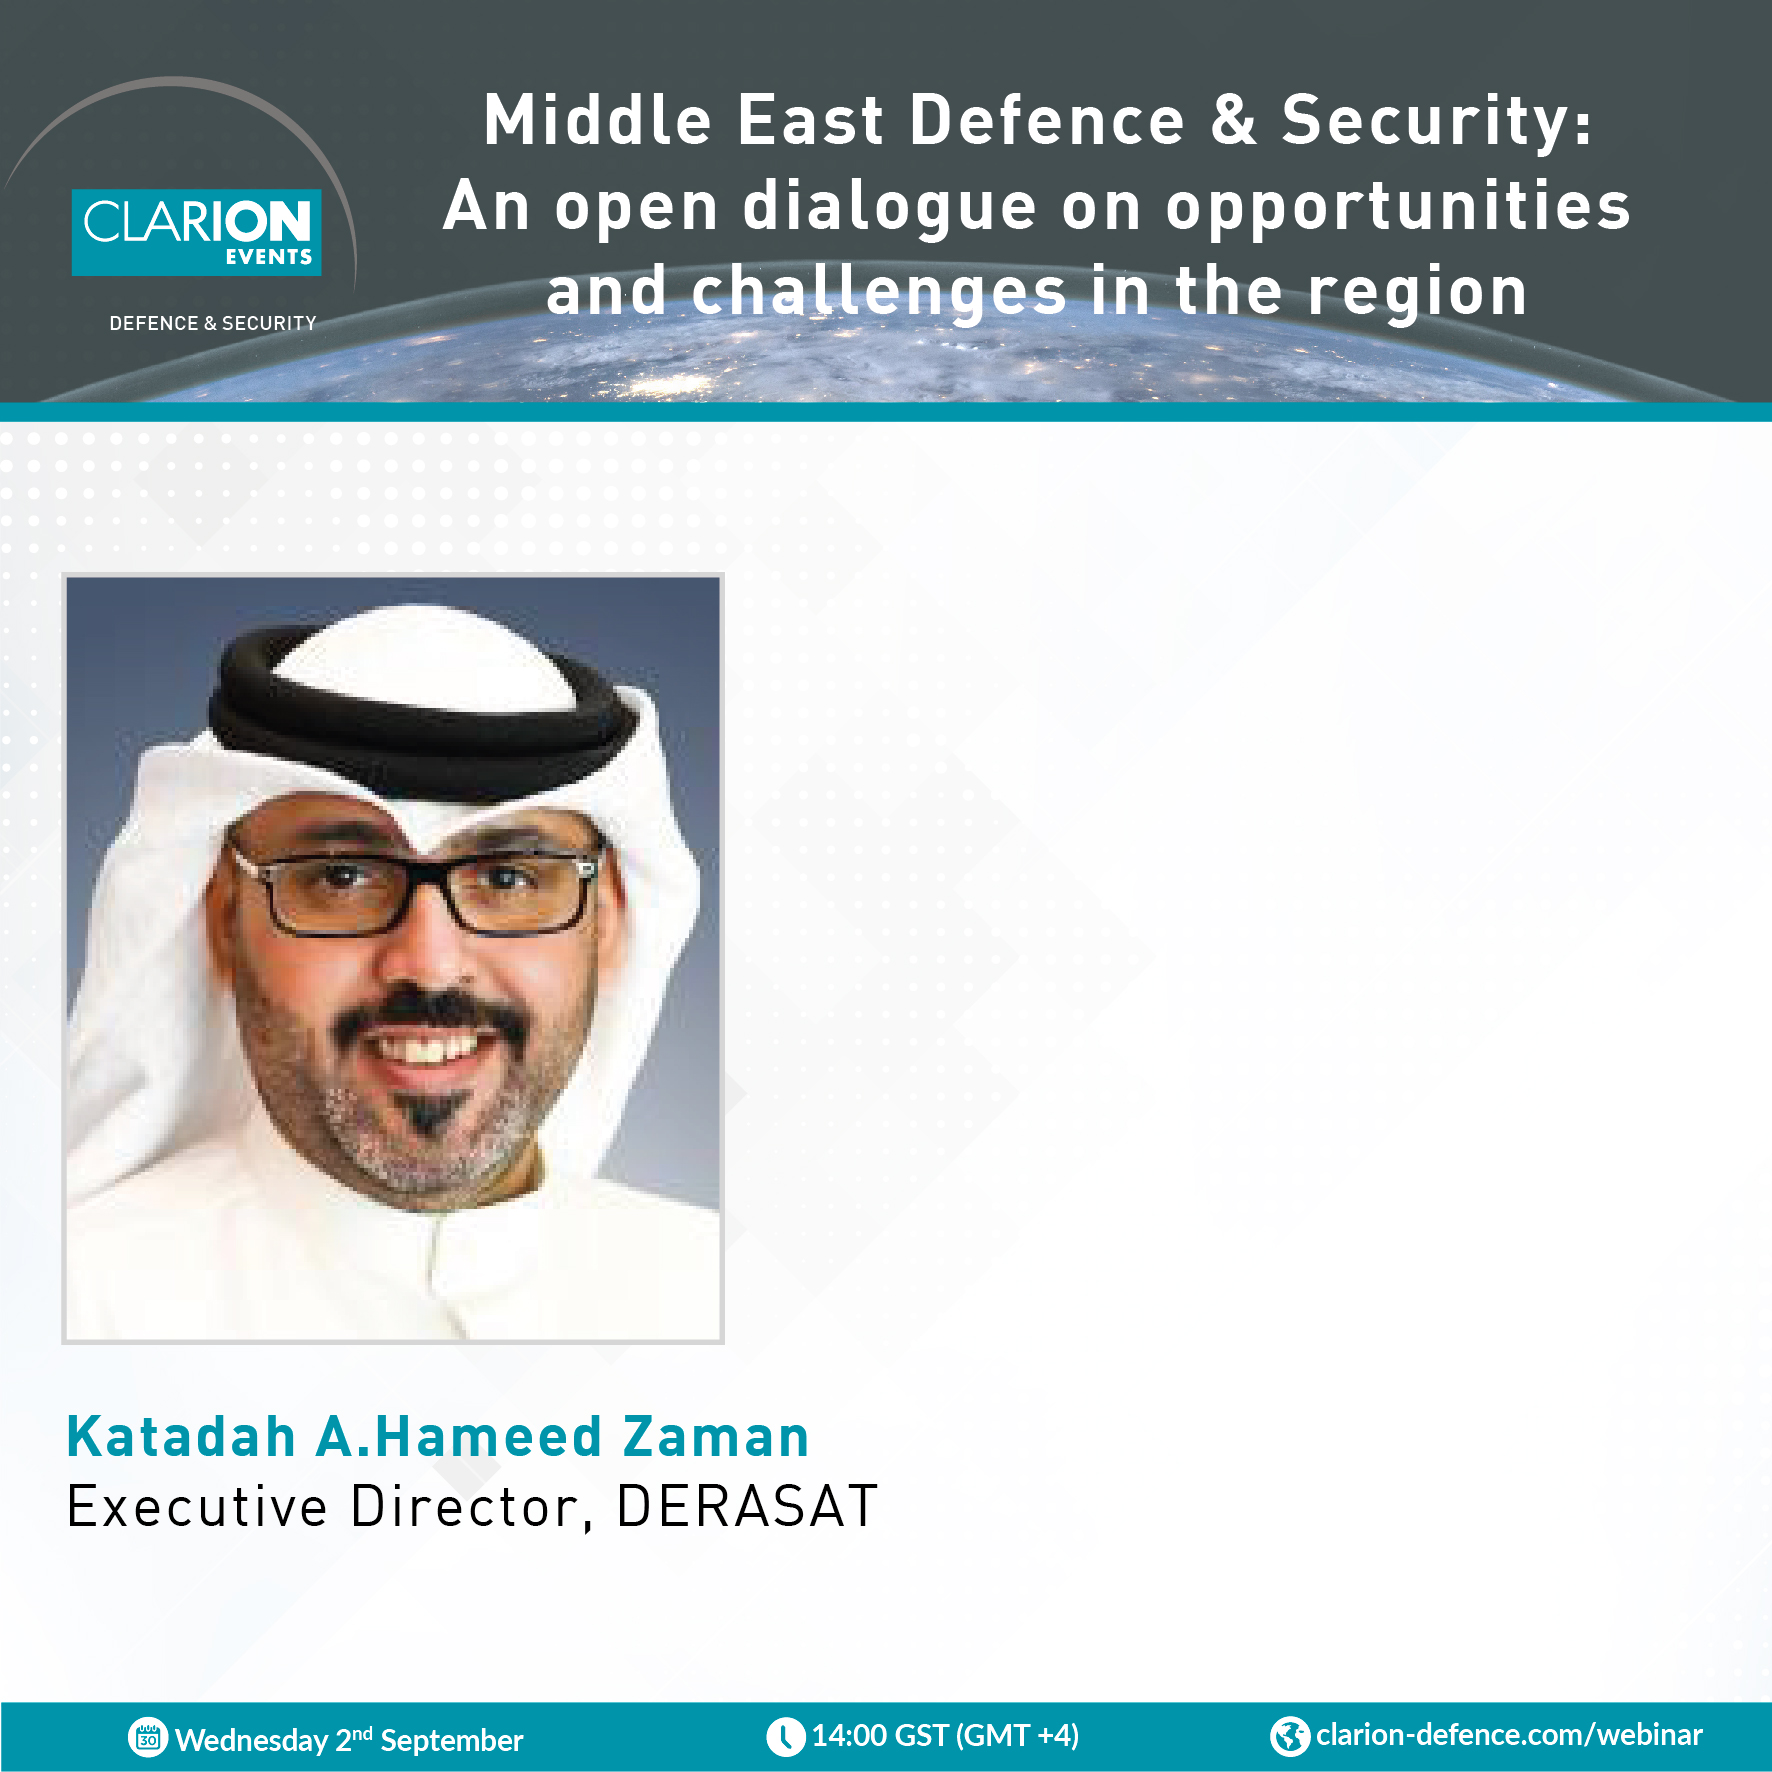 Webinar: Middle East Defence & Security: An open dialogue on opportunities and challenges in the region